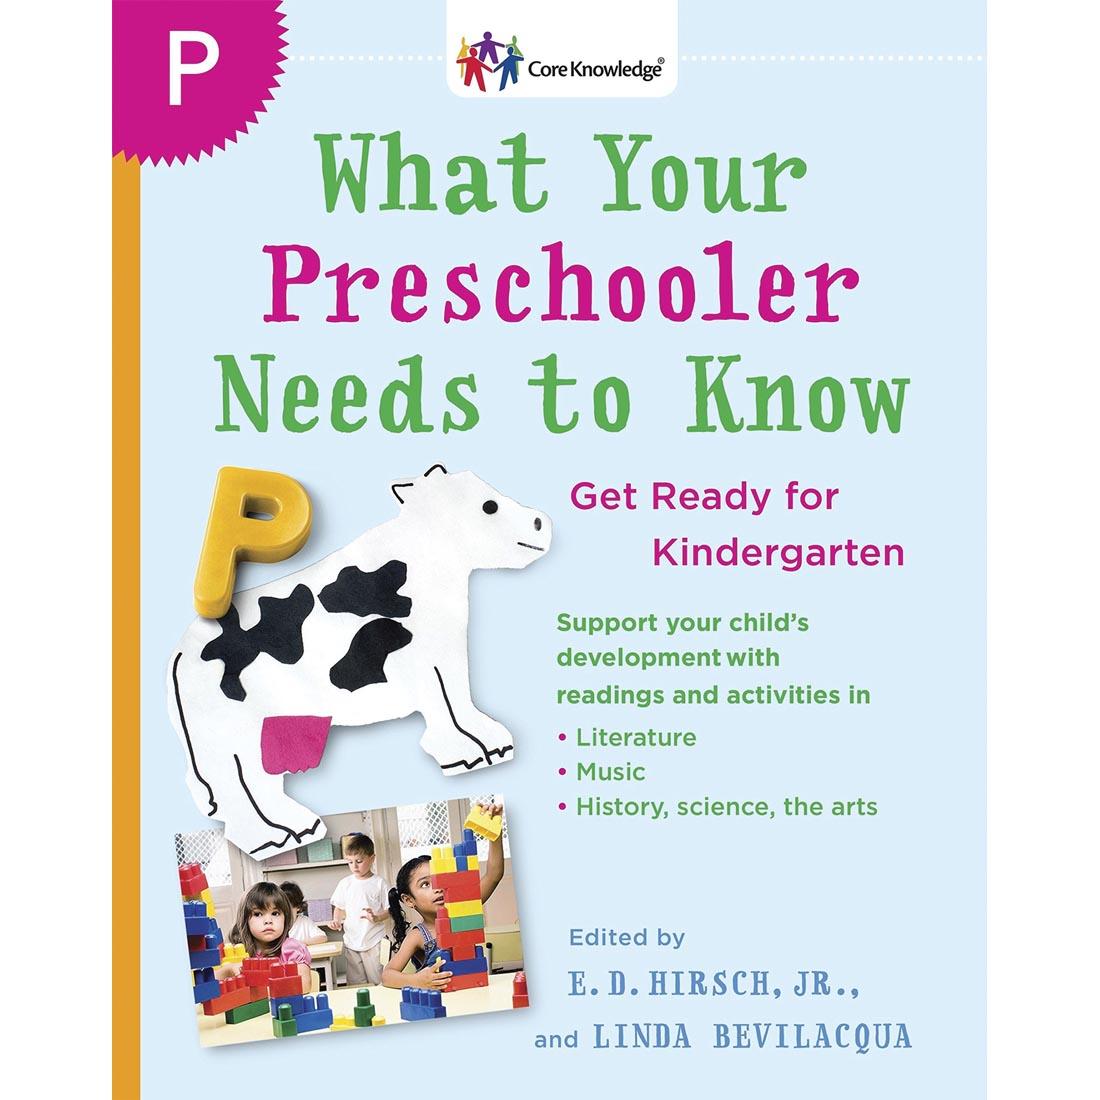 What Your Preschooler Needs To Know